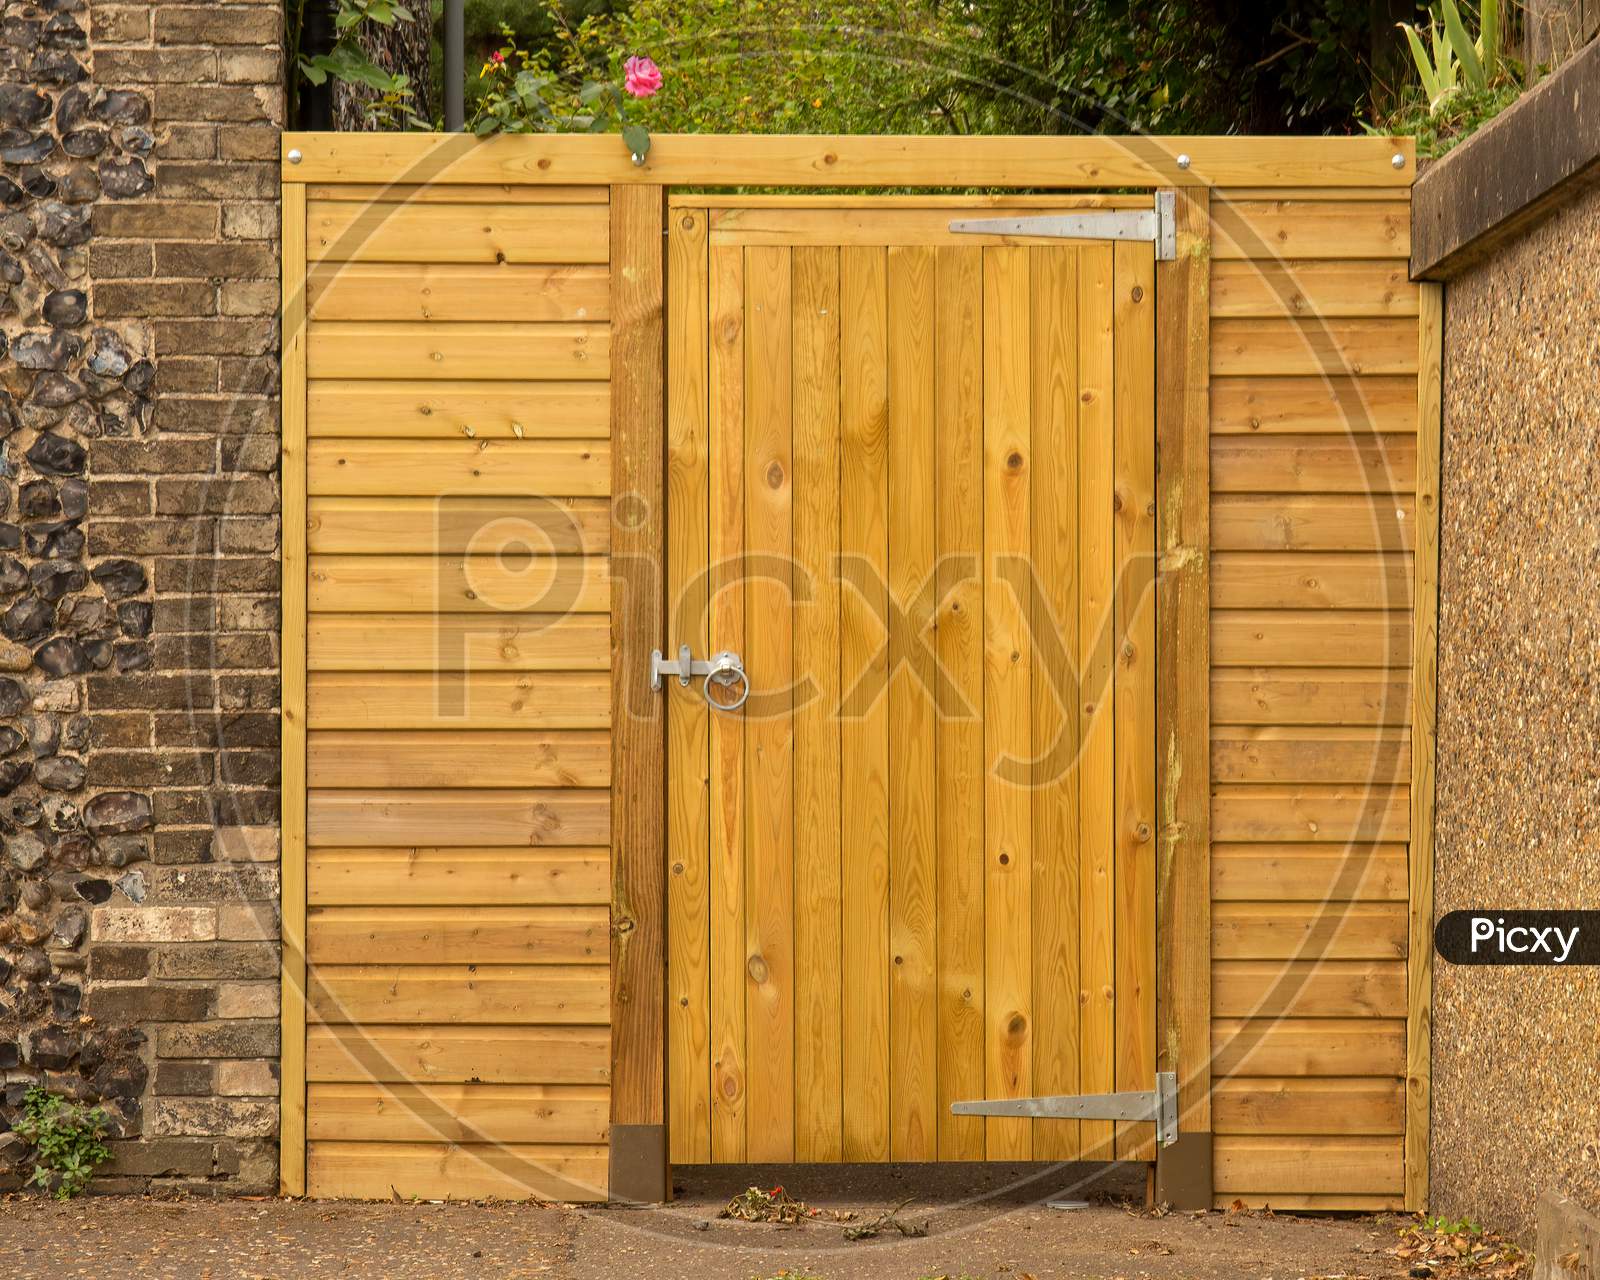 Wooden Garden Gate And Fence Panel With Nobody In View.